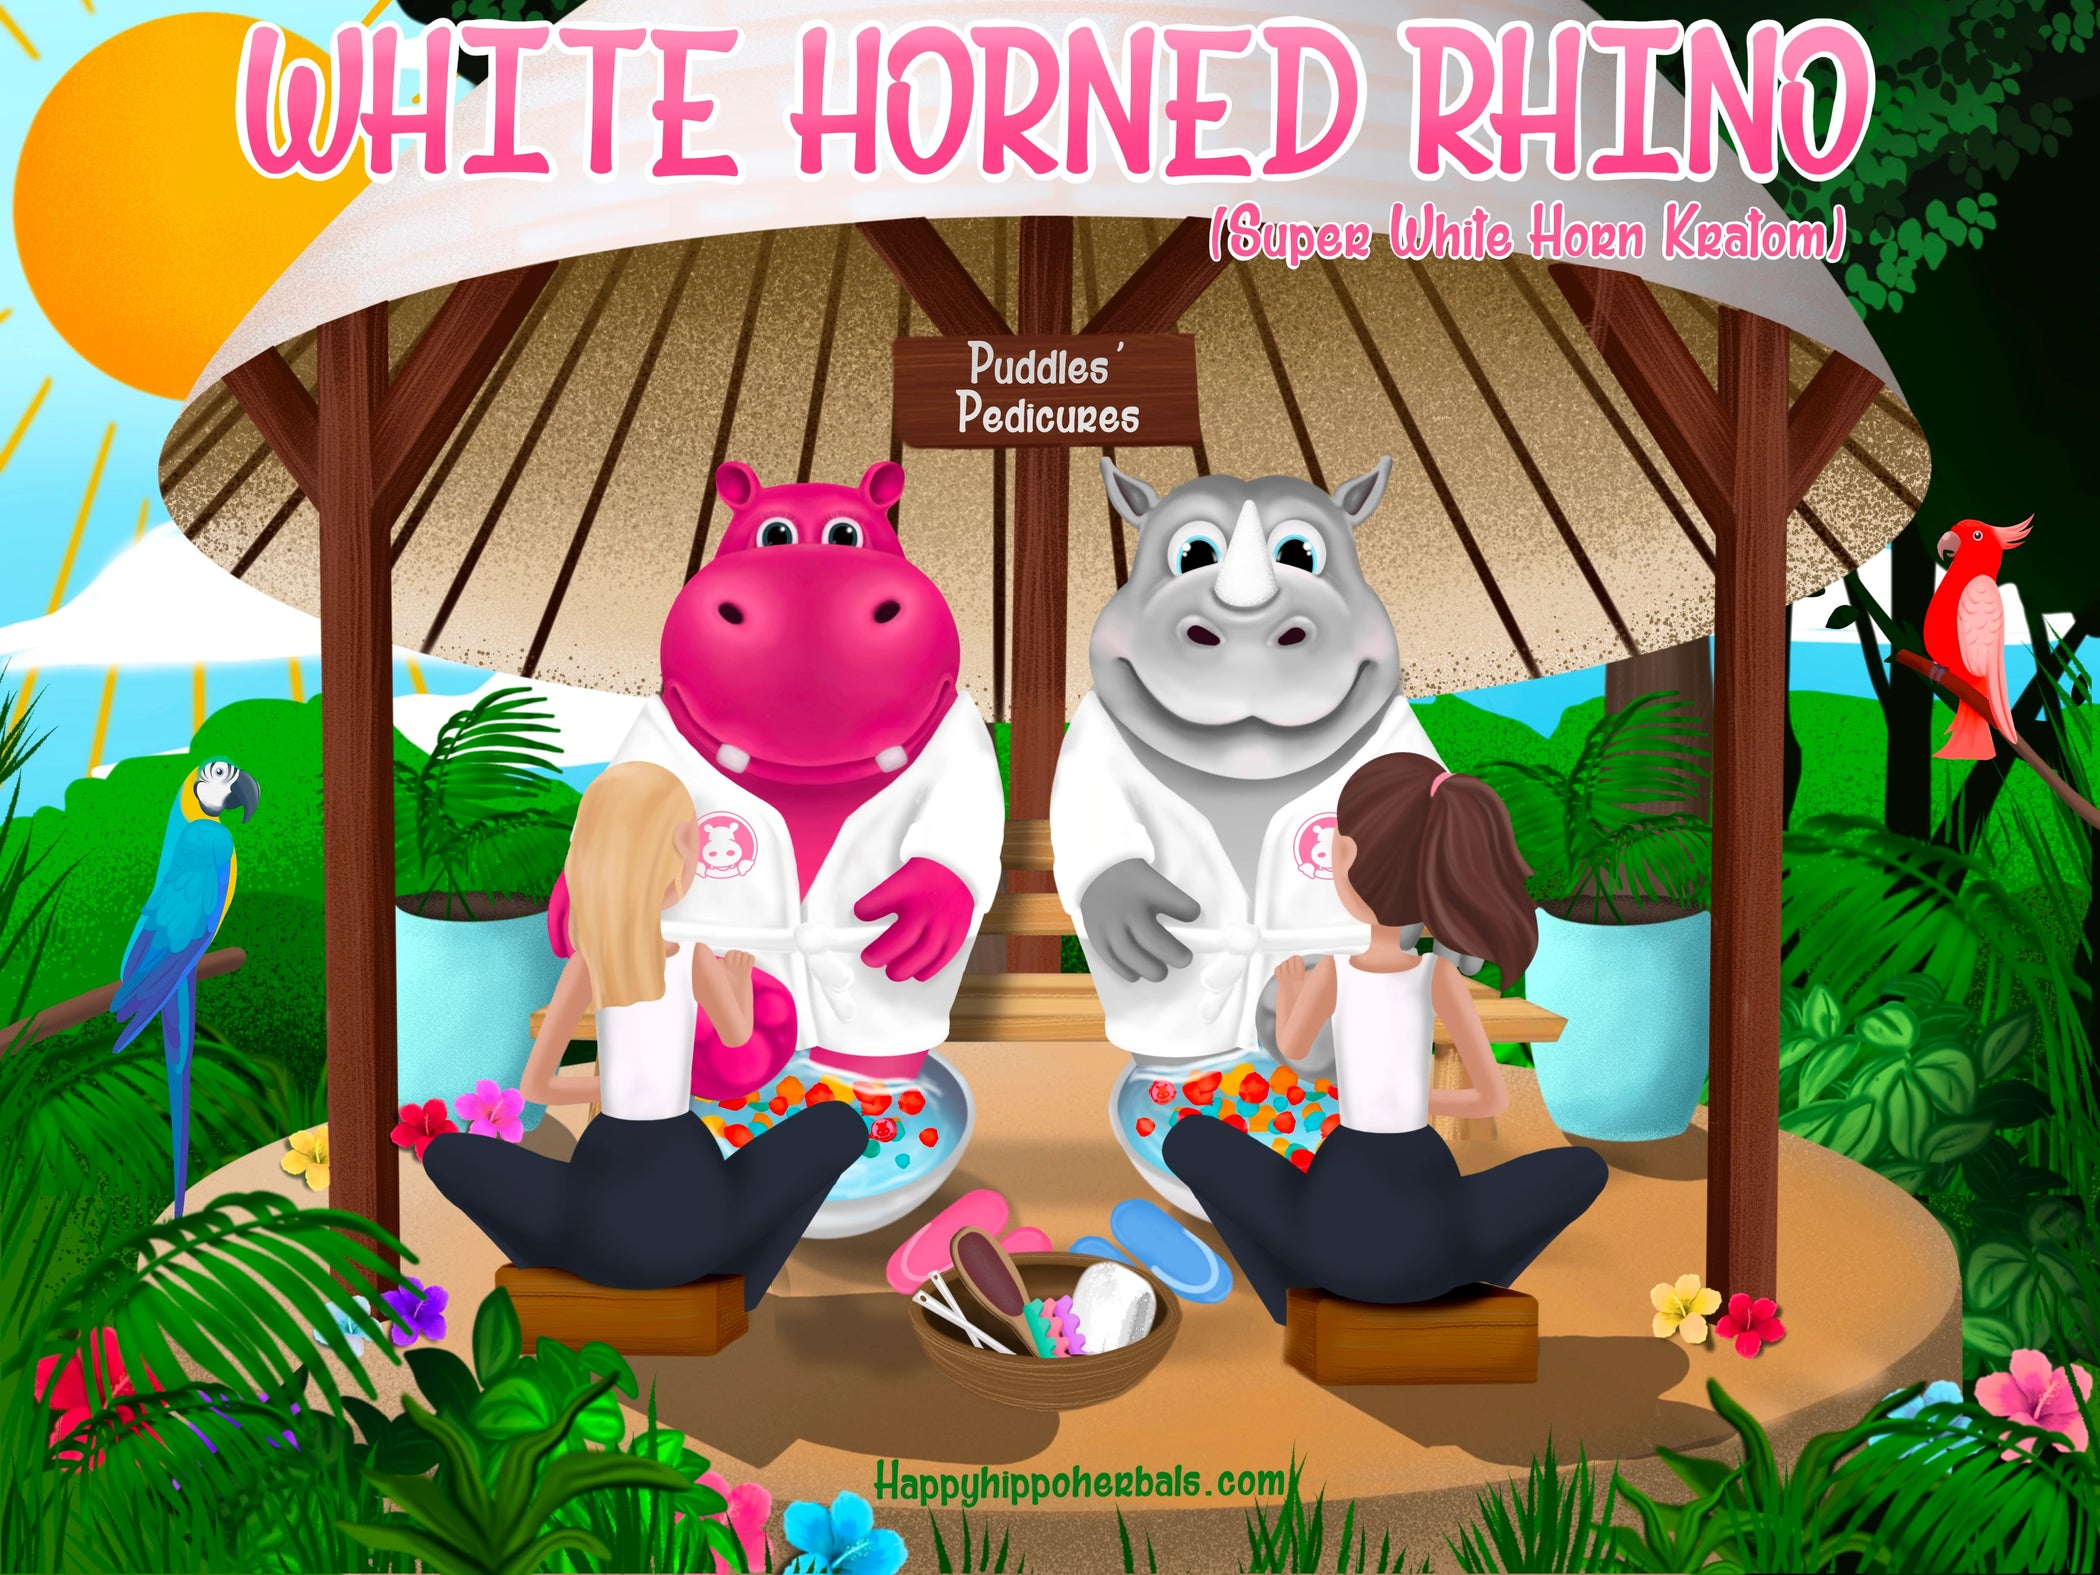 Graphic designed image depicting Puddles the Hippo getting pedicures with a rhinoceros friend while promoting White Horn Kratom Powder (White Horn Hippo)